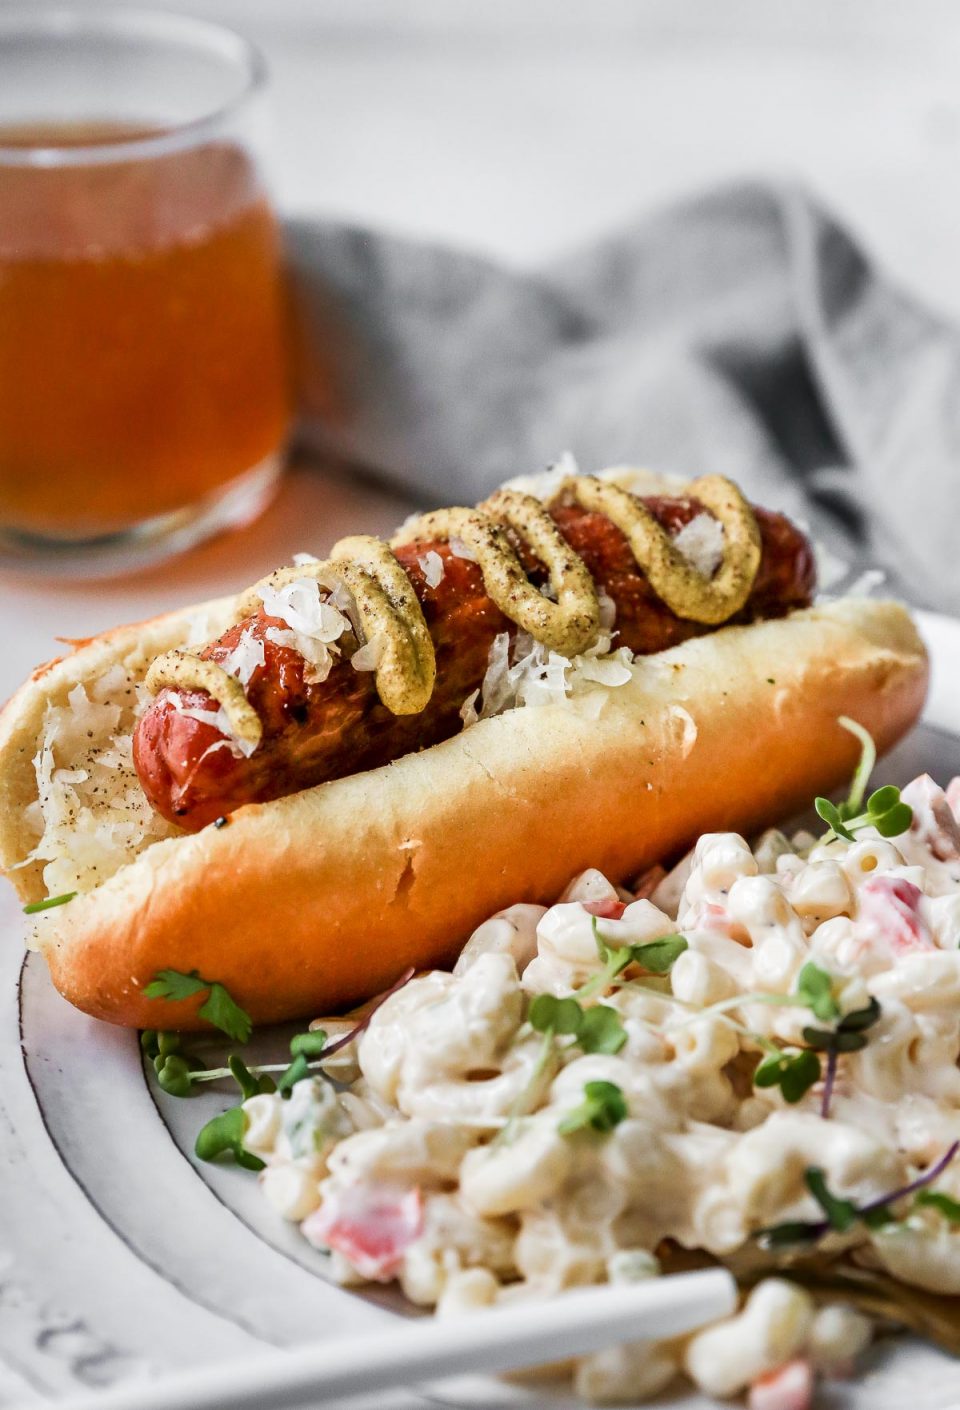 Side angle of Grilled Sausage on a bun, topped with brown mustard. The sausage is plated with a simple macaroni salad on the side, on a white plate with a gold & white fork. Off in the background, there is a glass of beer & a grey linen napkin.